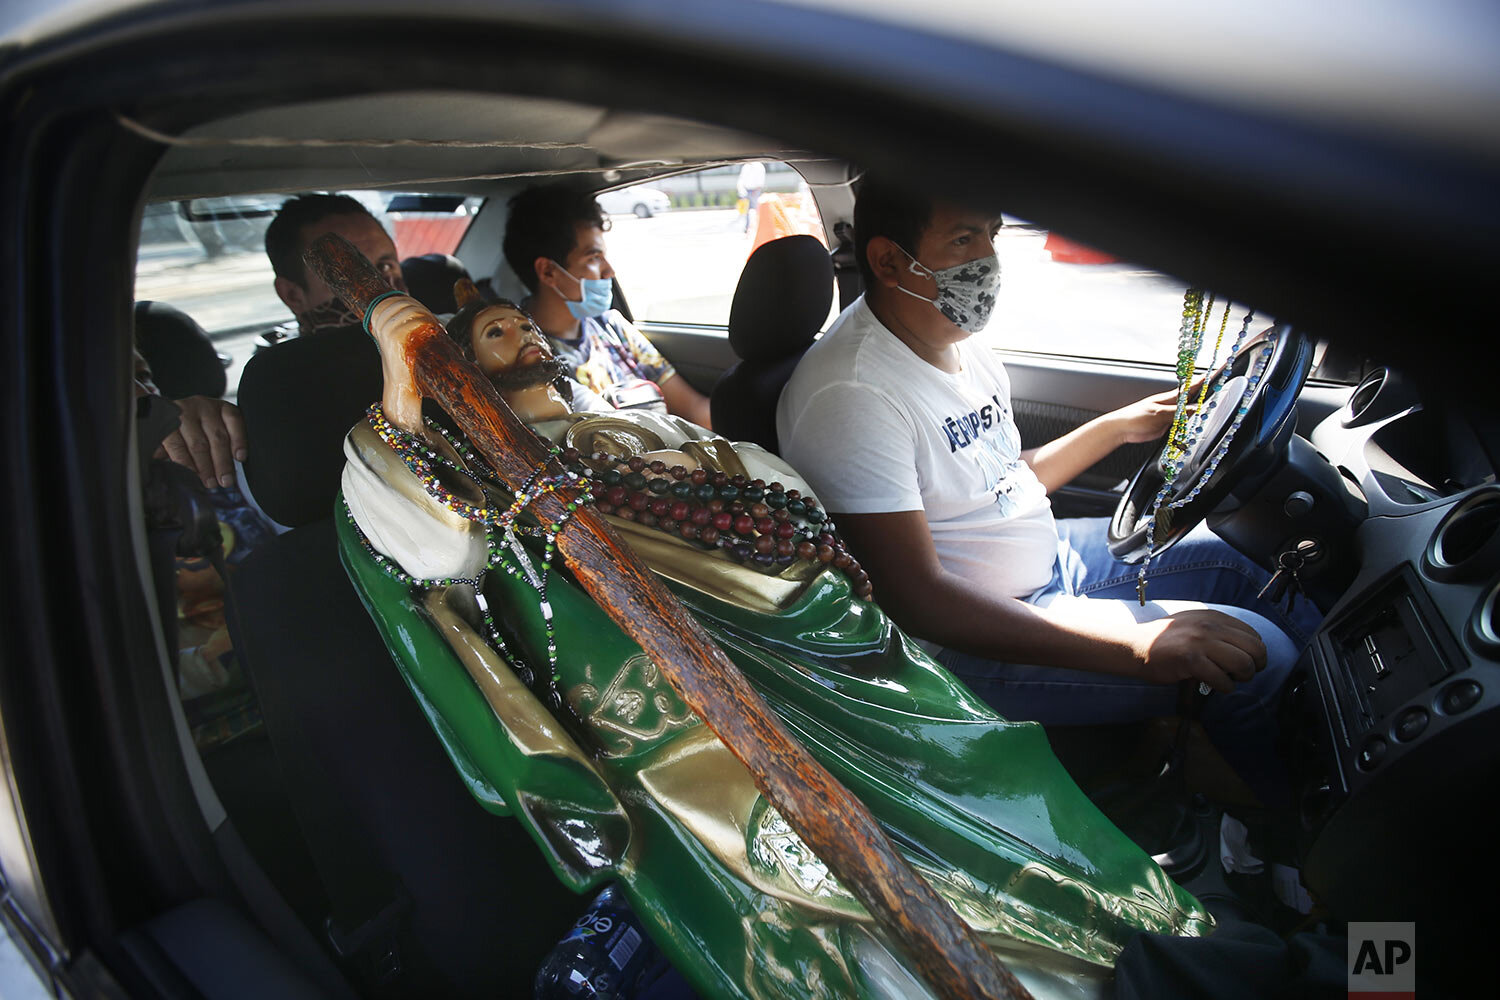  A Saint Jude statue is transported in the passenger seat of a car during the annual pilgrimage honoring Jude, the patron saint of lost causes, in Mexico City, Oct. 28, 2020. (AP Photo/Marco Ugarte) 